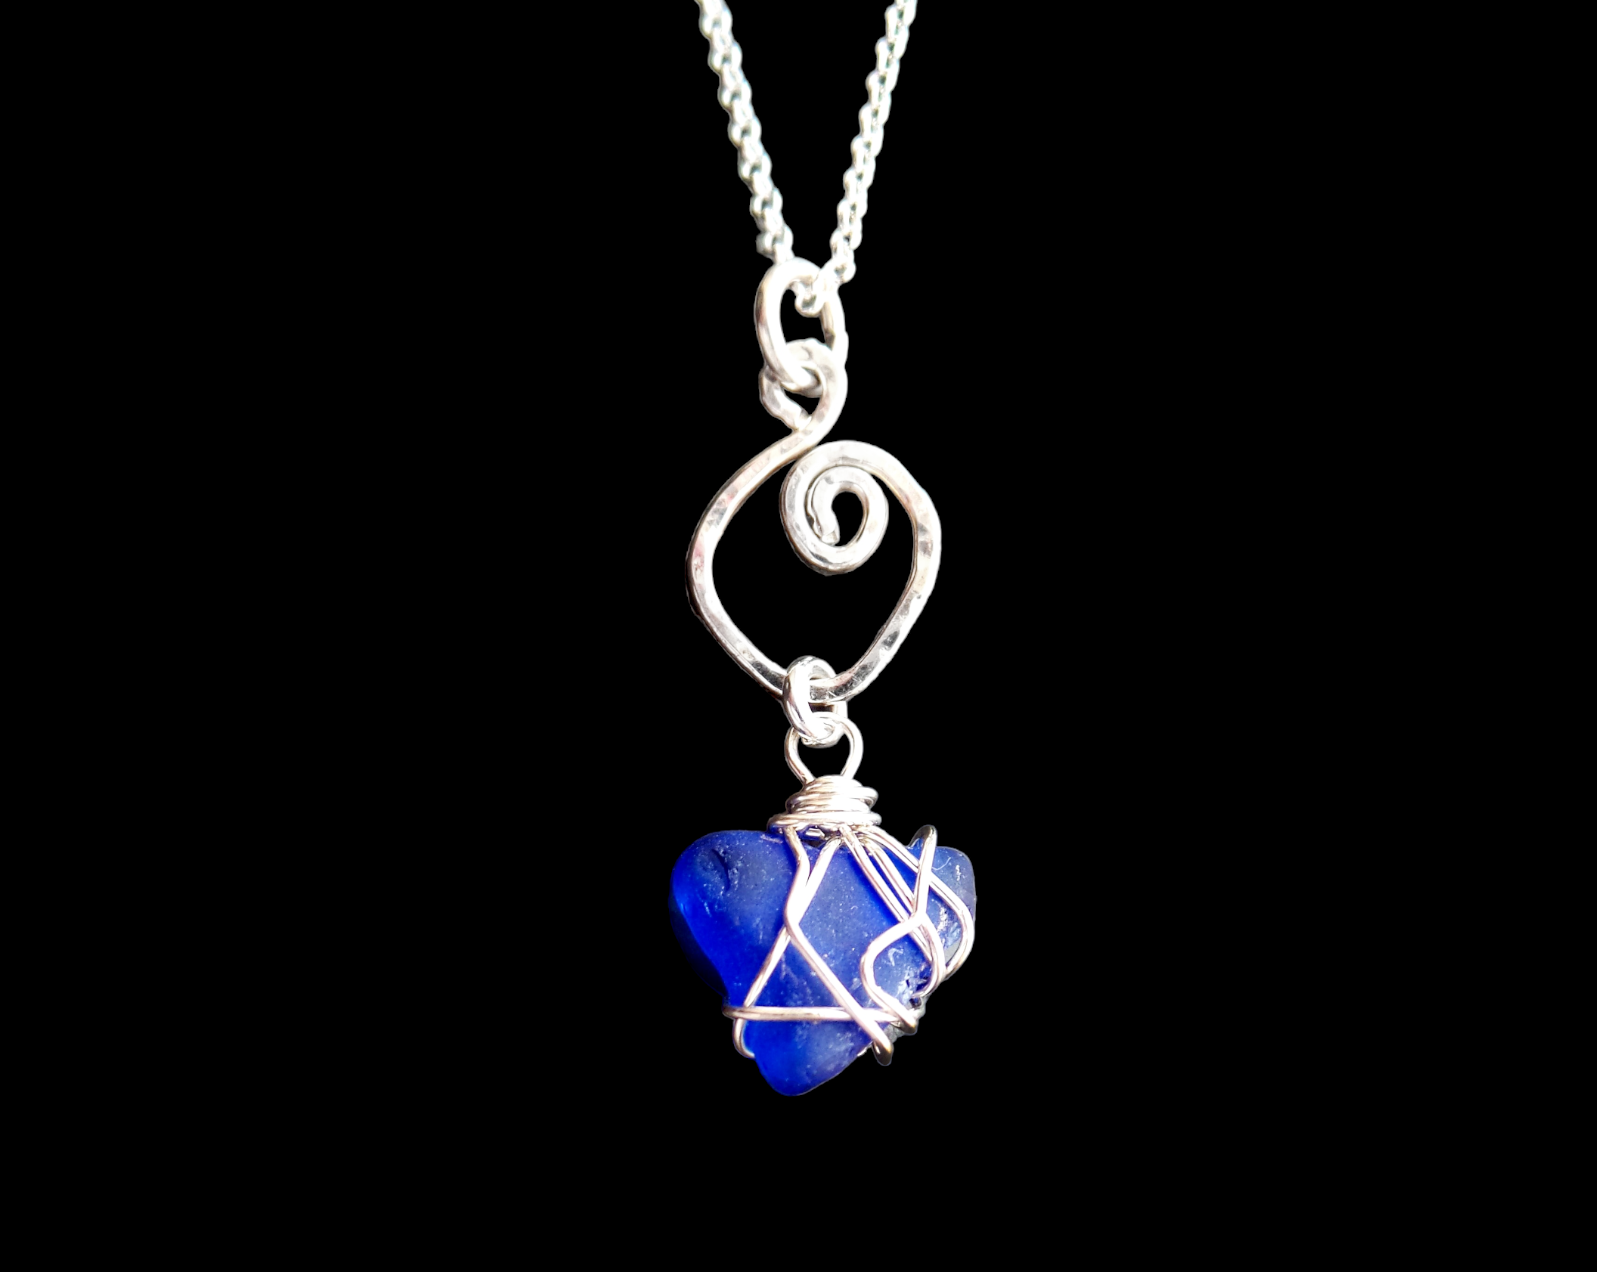 Celtic Blue Beach Glass Pendant, Sterling Silver, Wire Wrapped Pendant on Chain, Lake Ontario